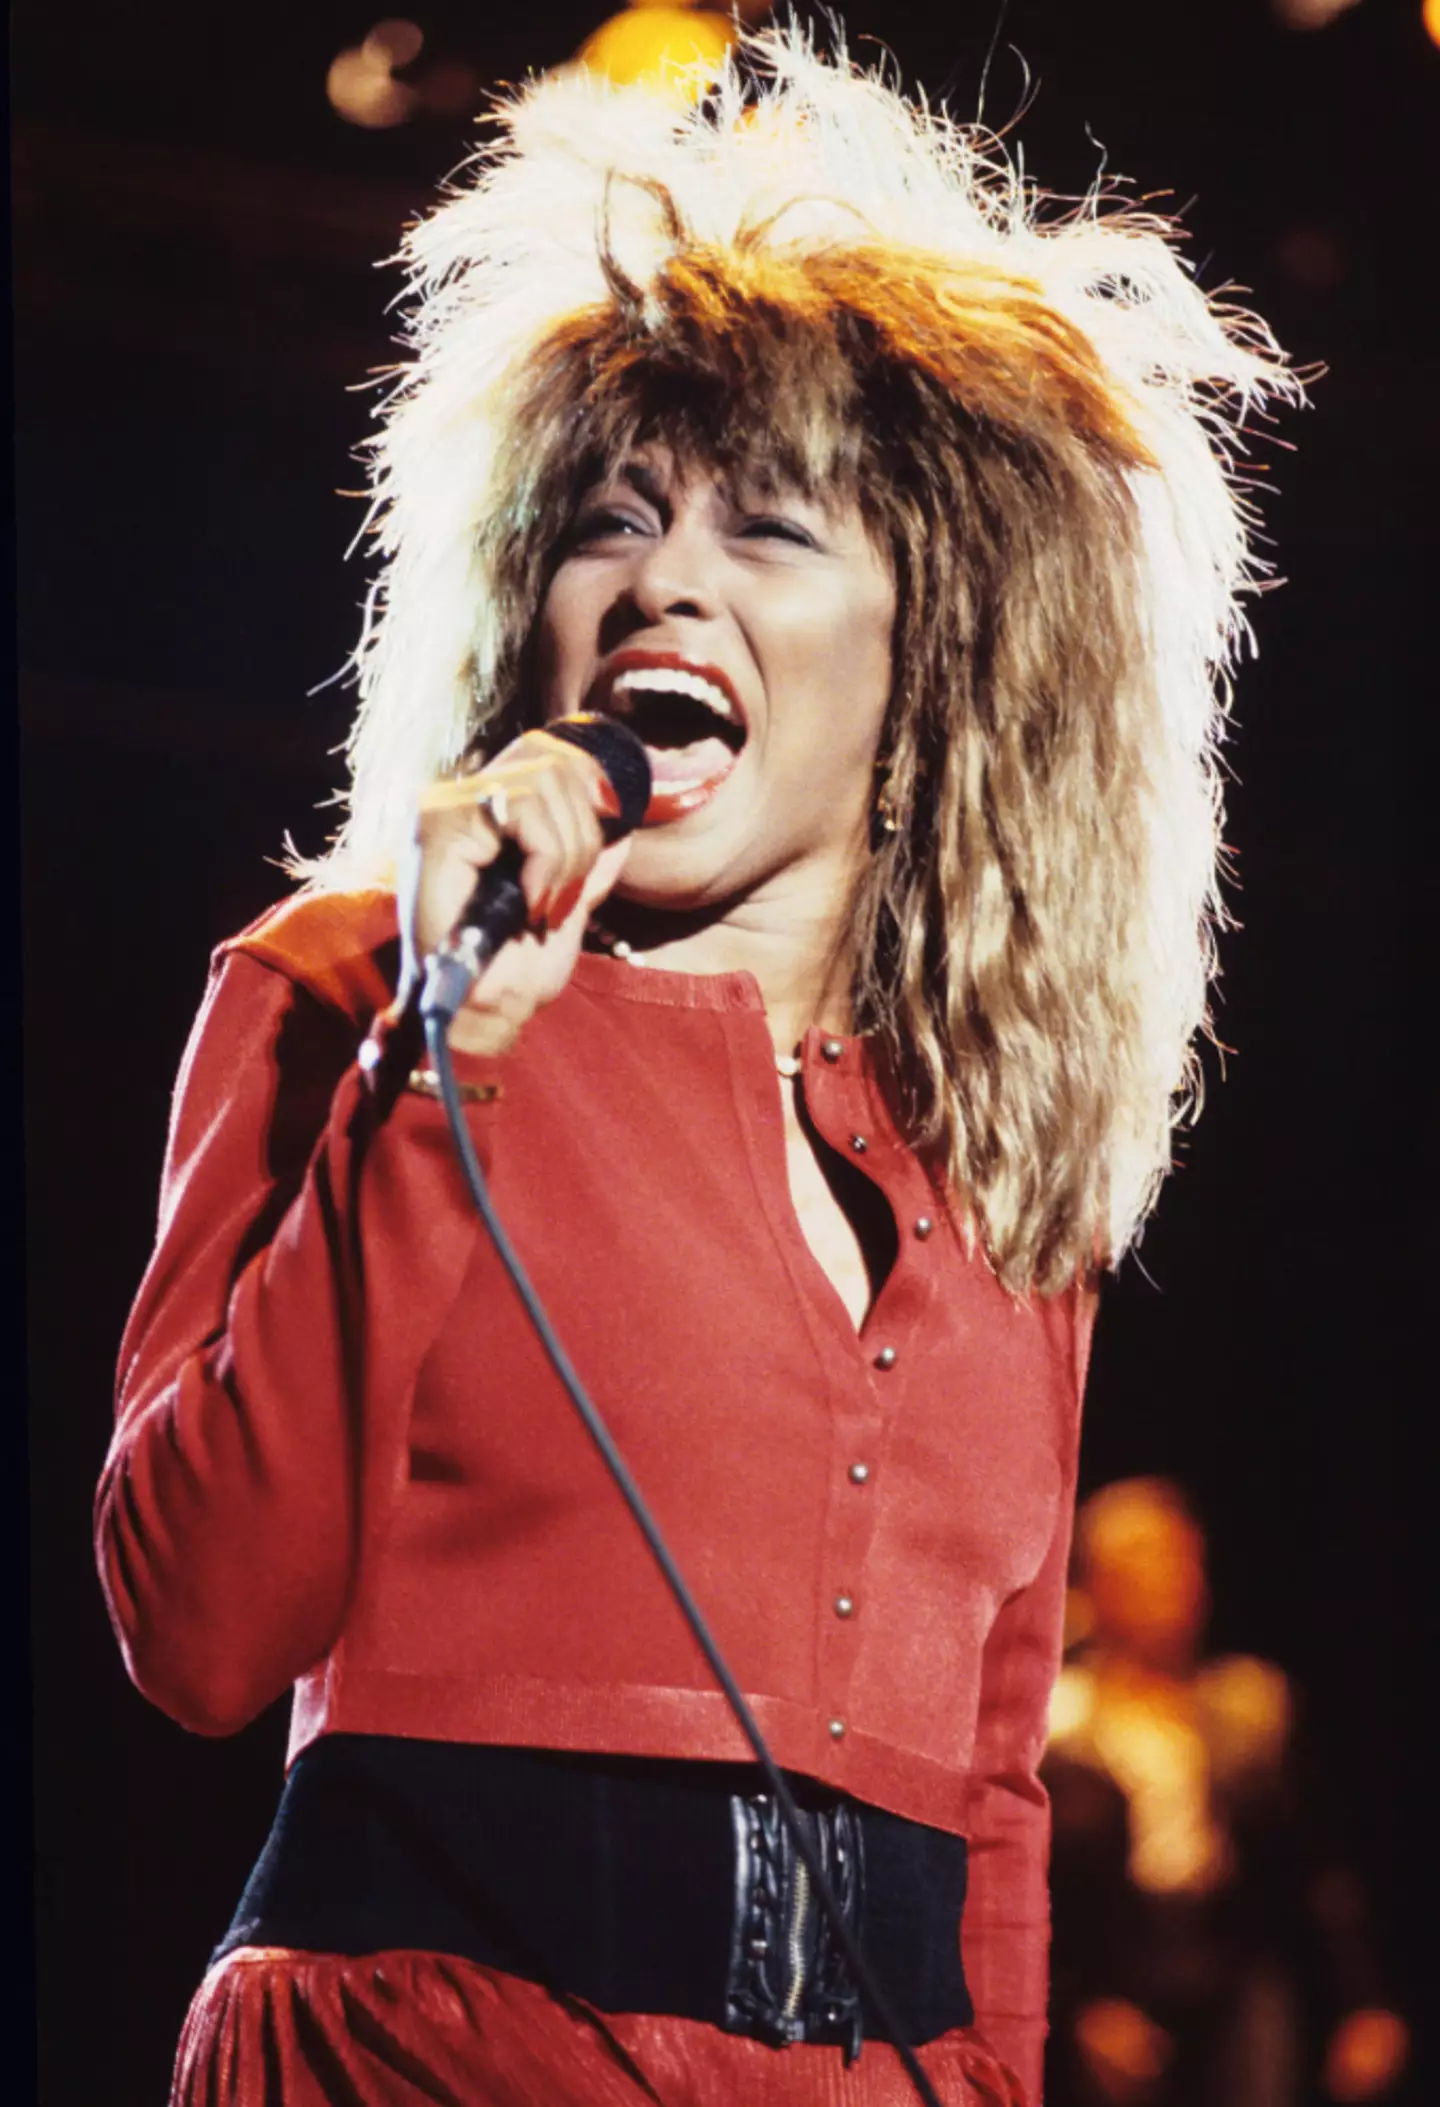 Tina Turner died at the age of 83 on Wednesday (24 May).